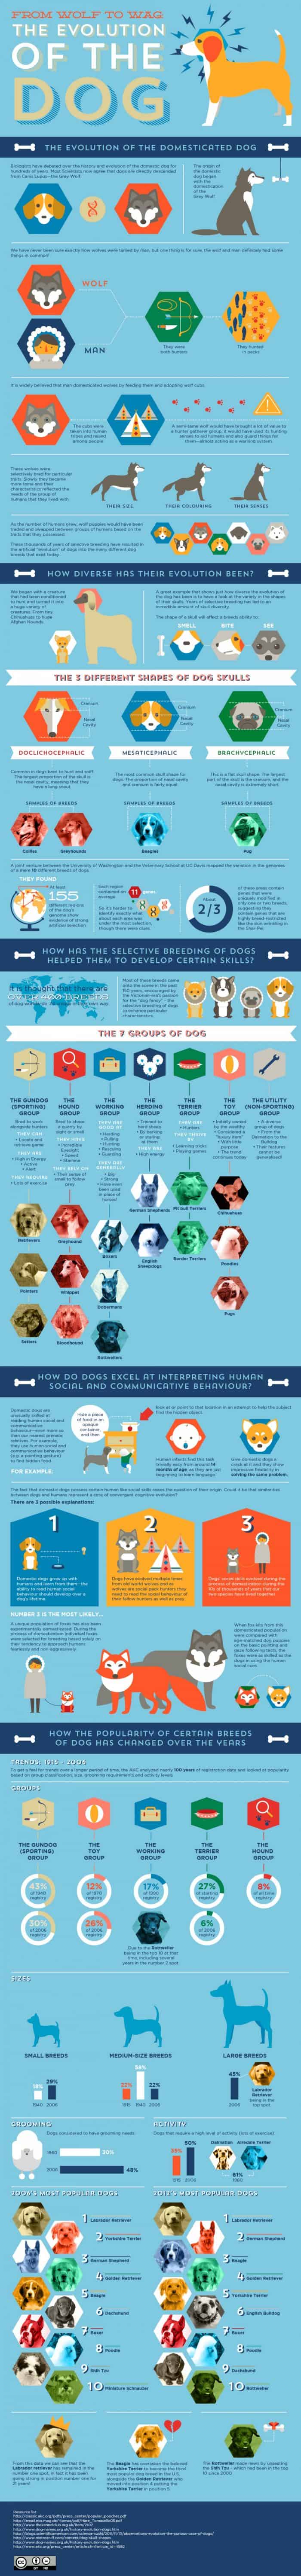 Evolution of the Dog Infographic